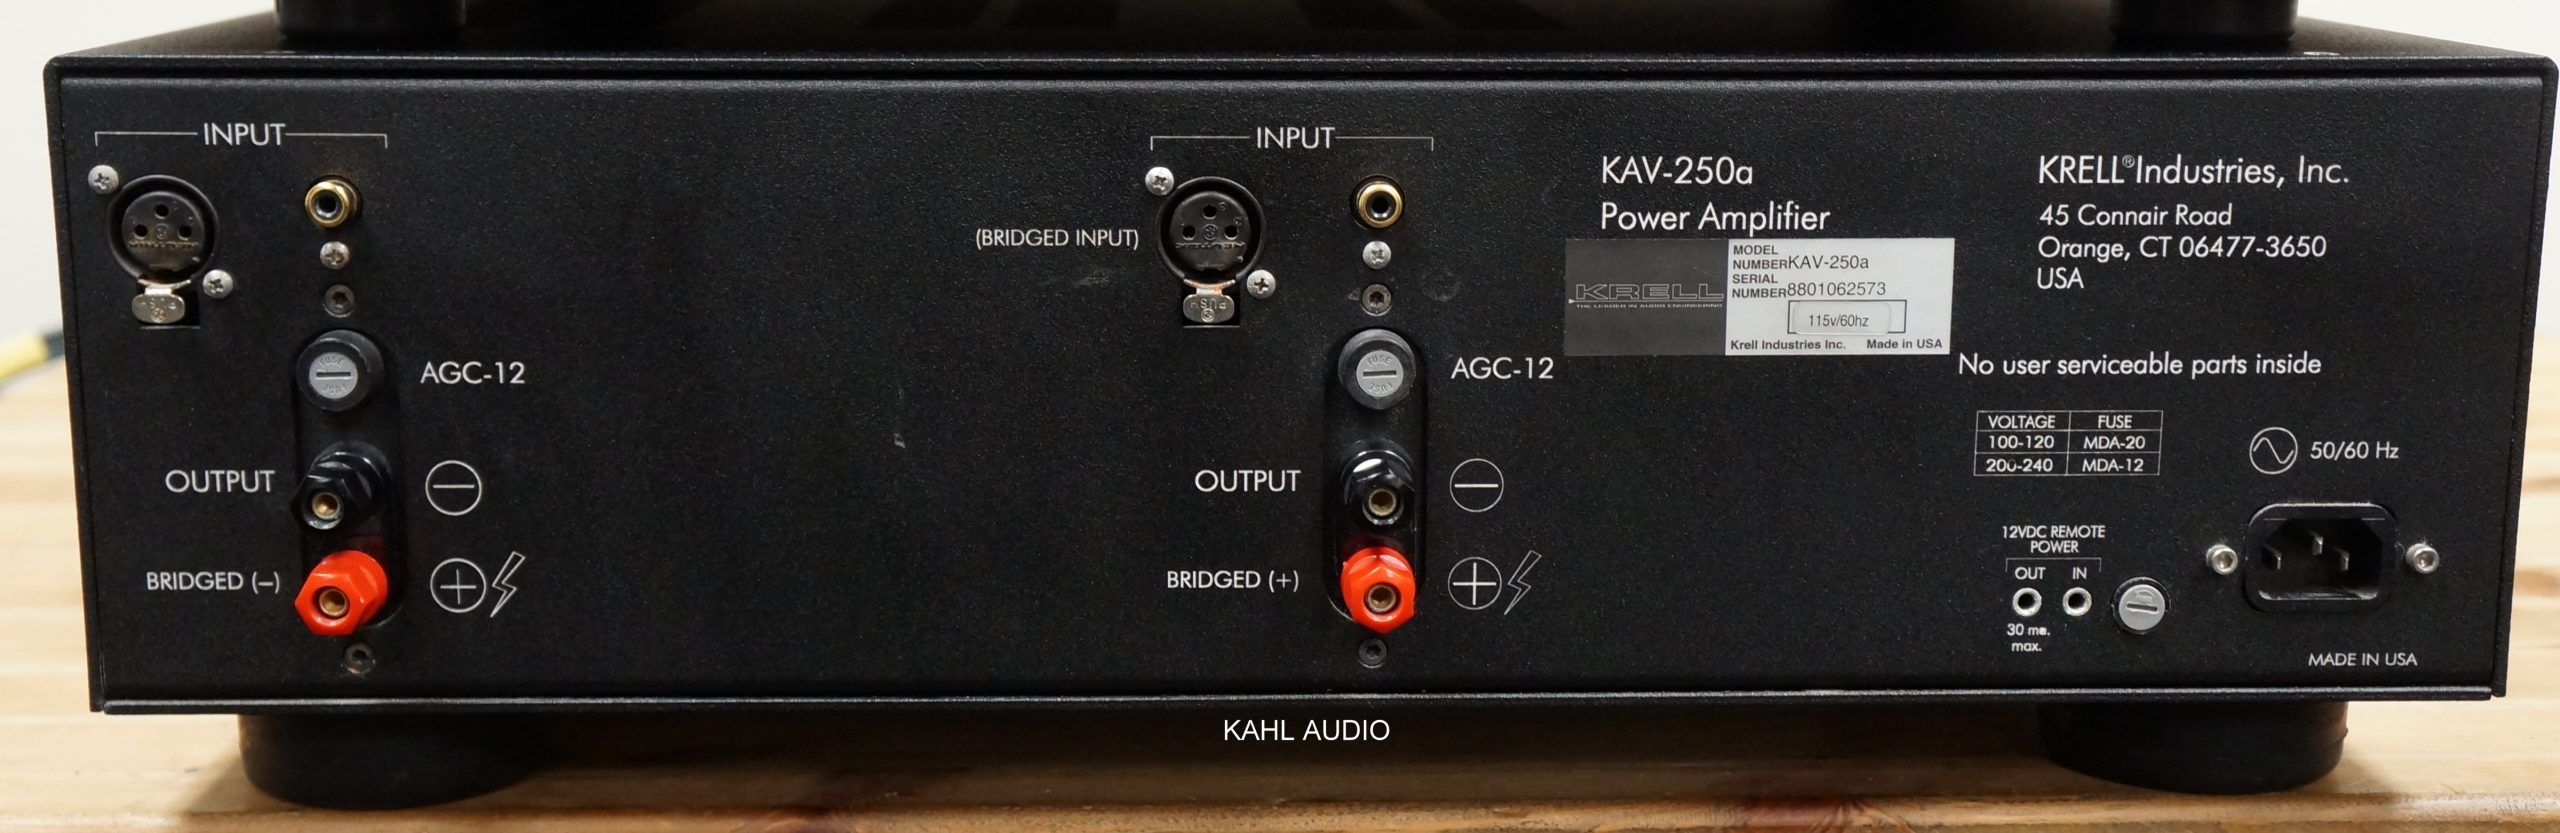 Krell KAV-250a stereo amp. Lots of positive reviews! $3,300 MSRP